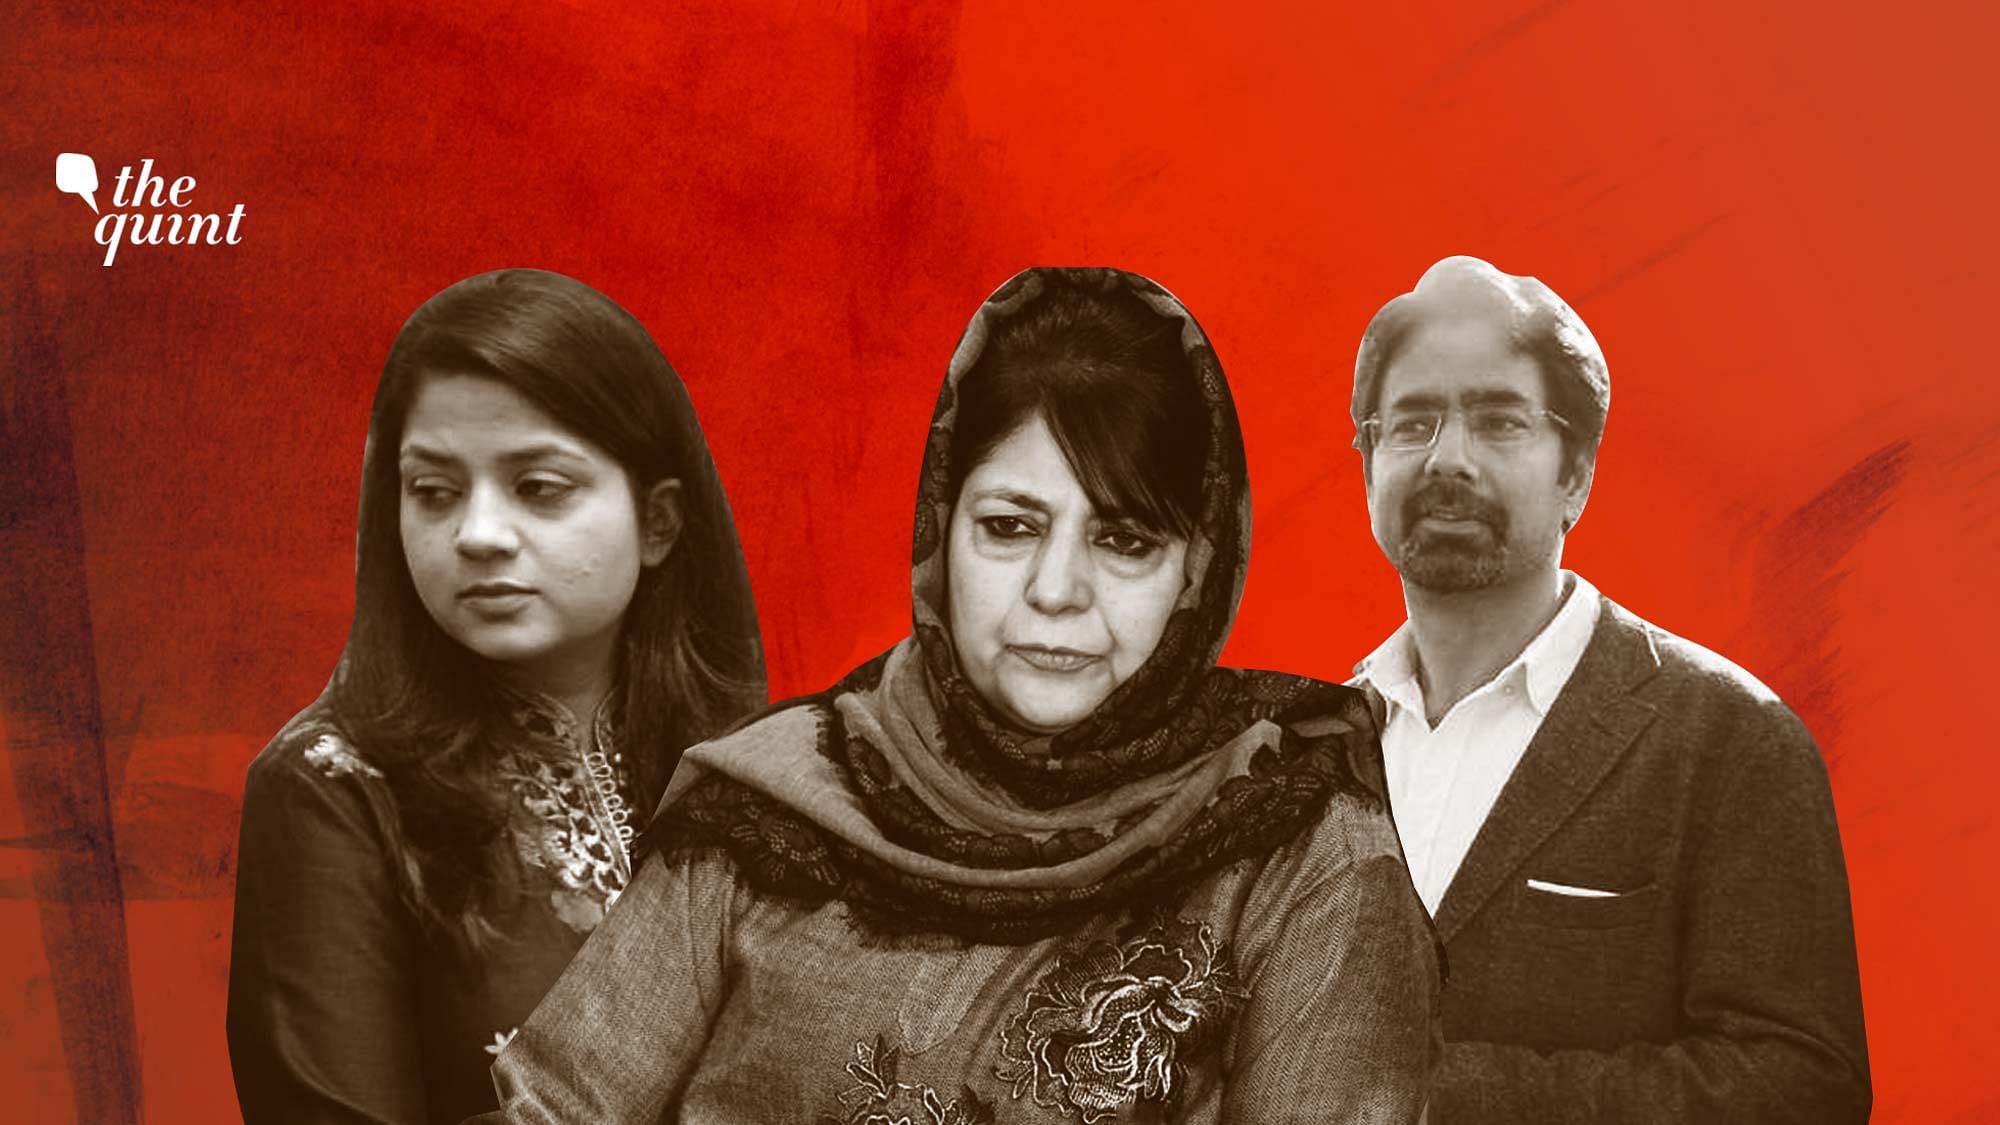 J&amp;K CM Mehbooba Mufti’s daughter Iltija Javed and brother Tassaduq Mufti are likely to lose Special Security Group (SSG) cover.